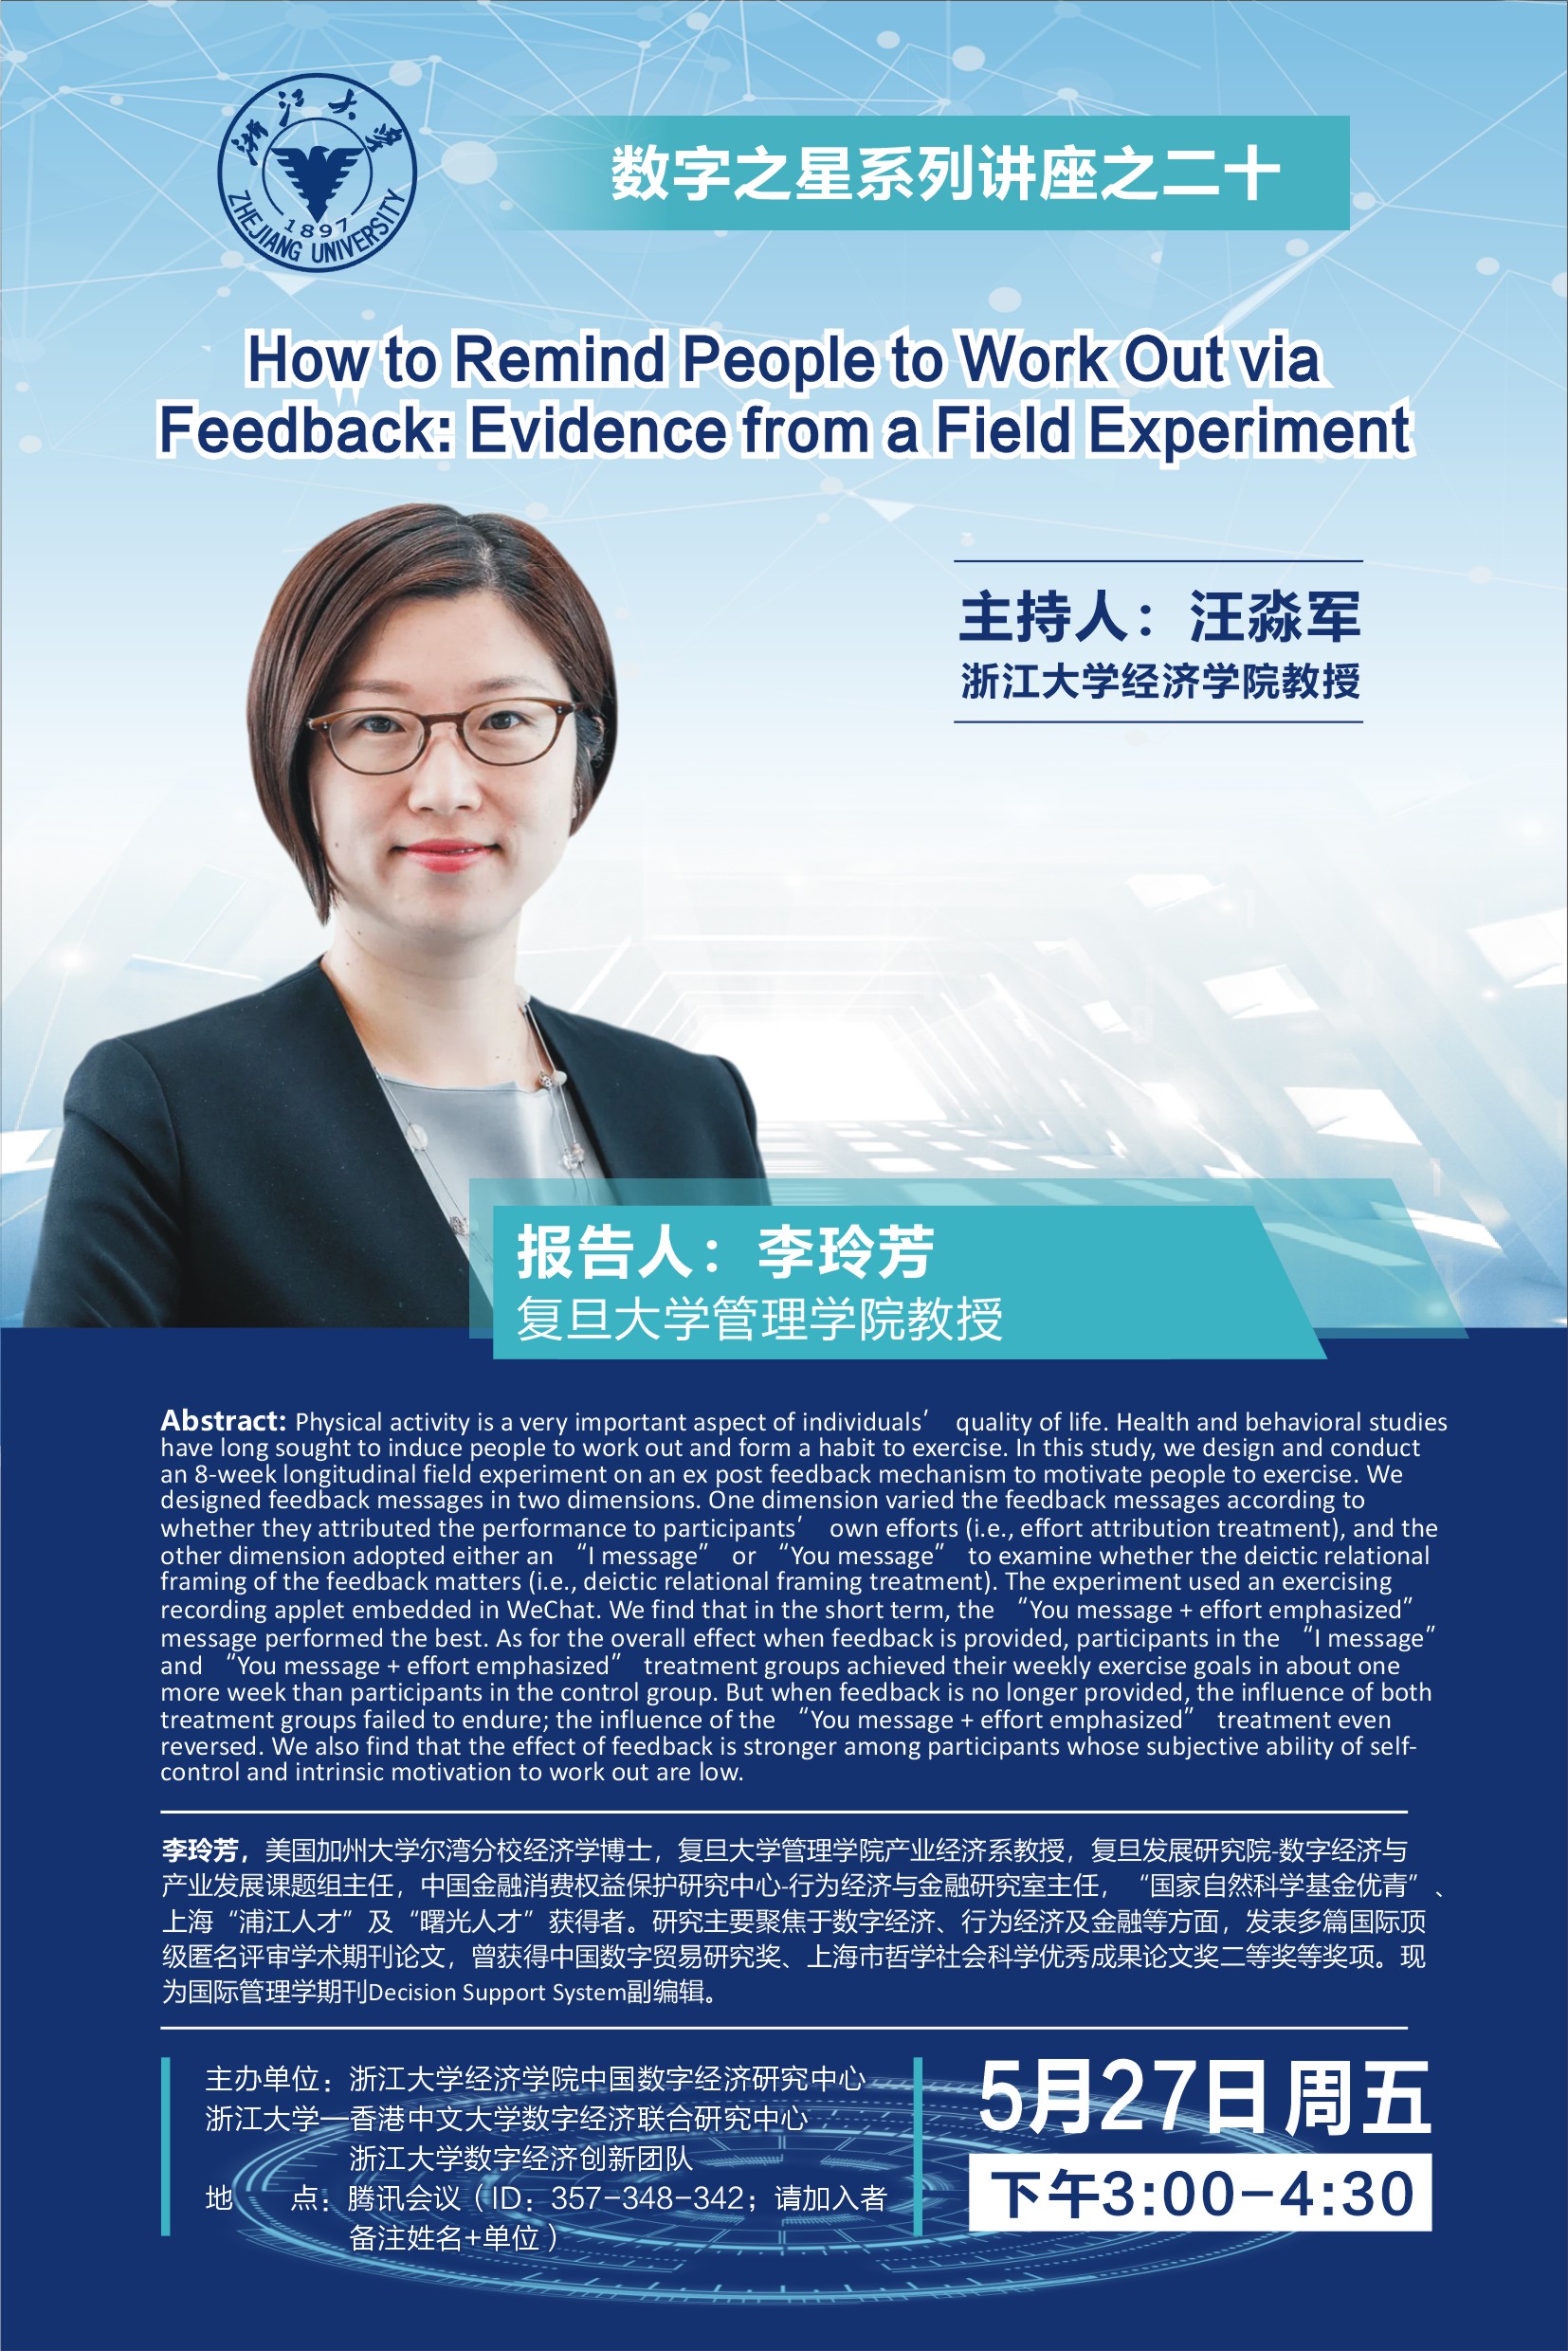 【 The Digital Star Seminar Series No.20 】How to Remind People to Work Out via Feedback: Evidence from a Field Experiment